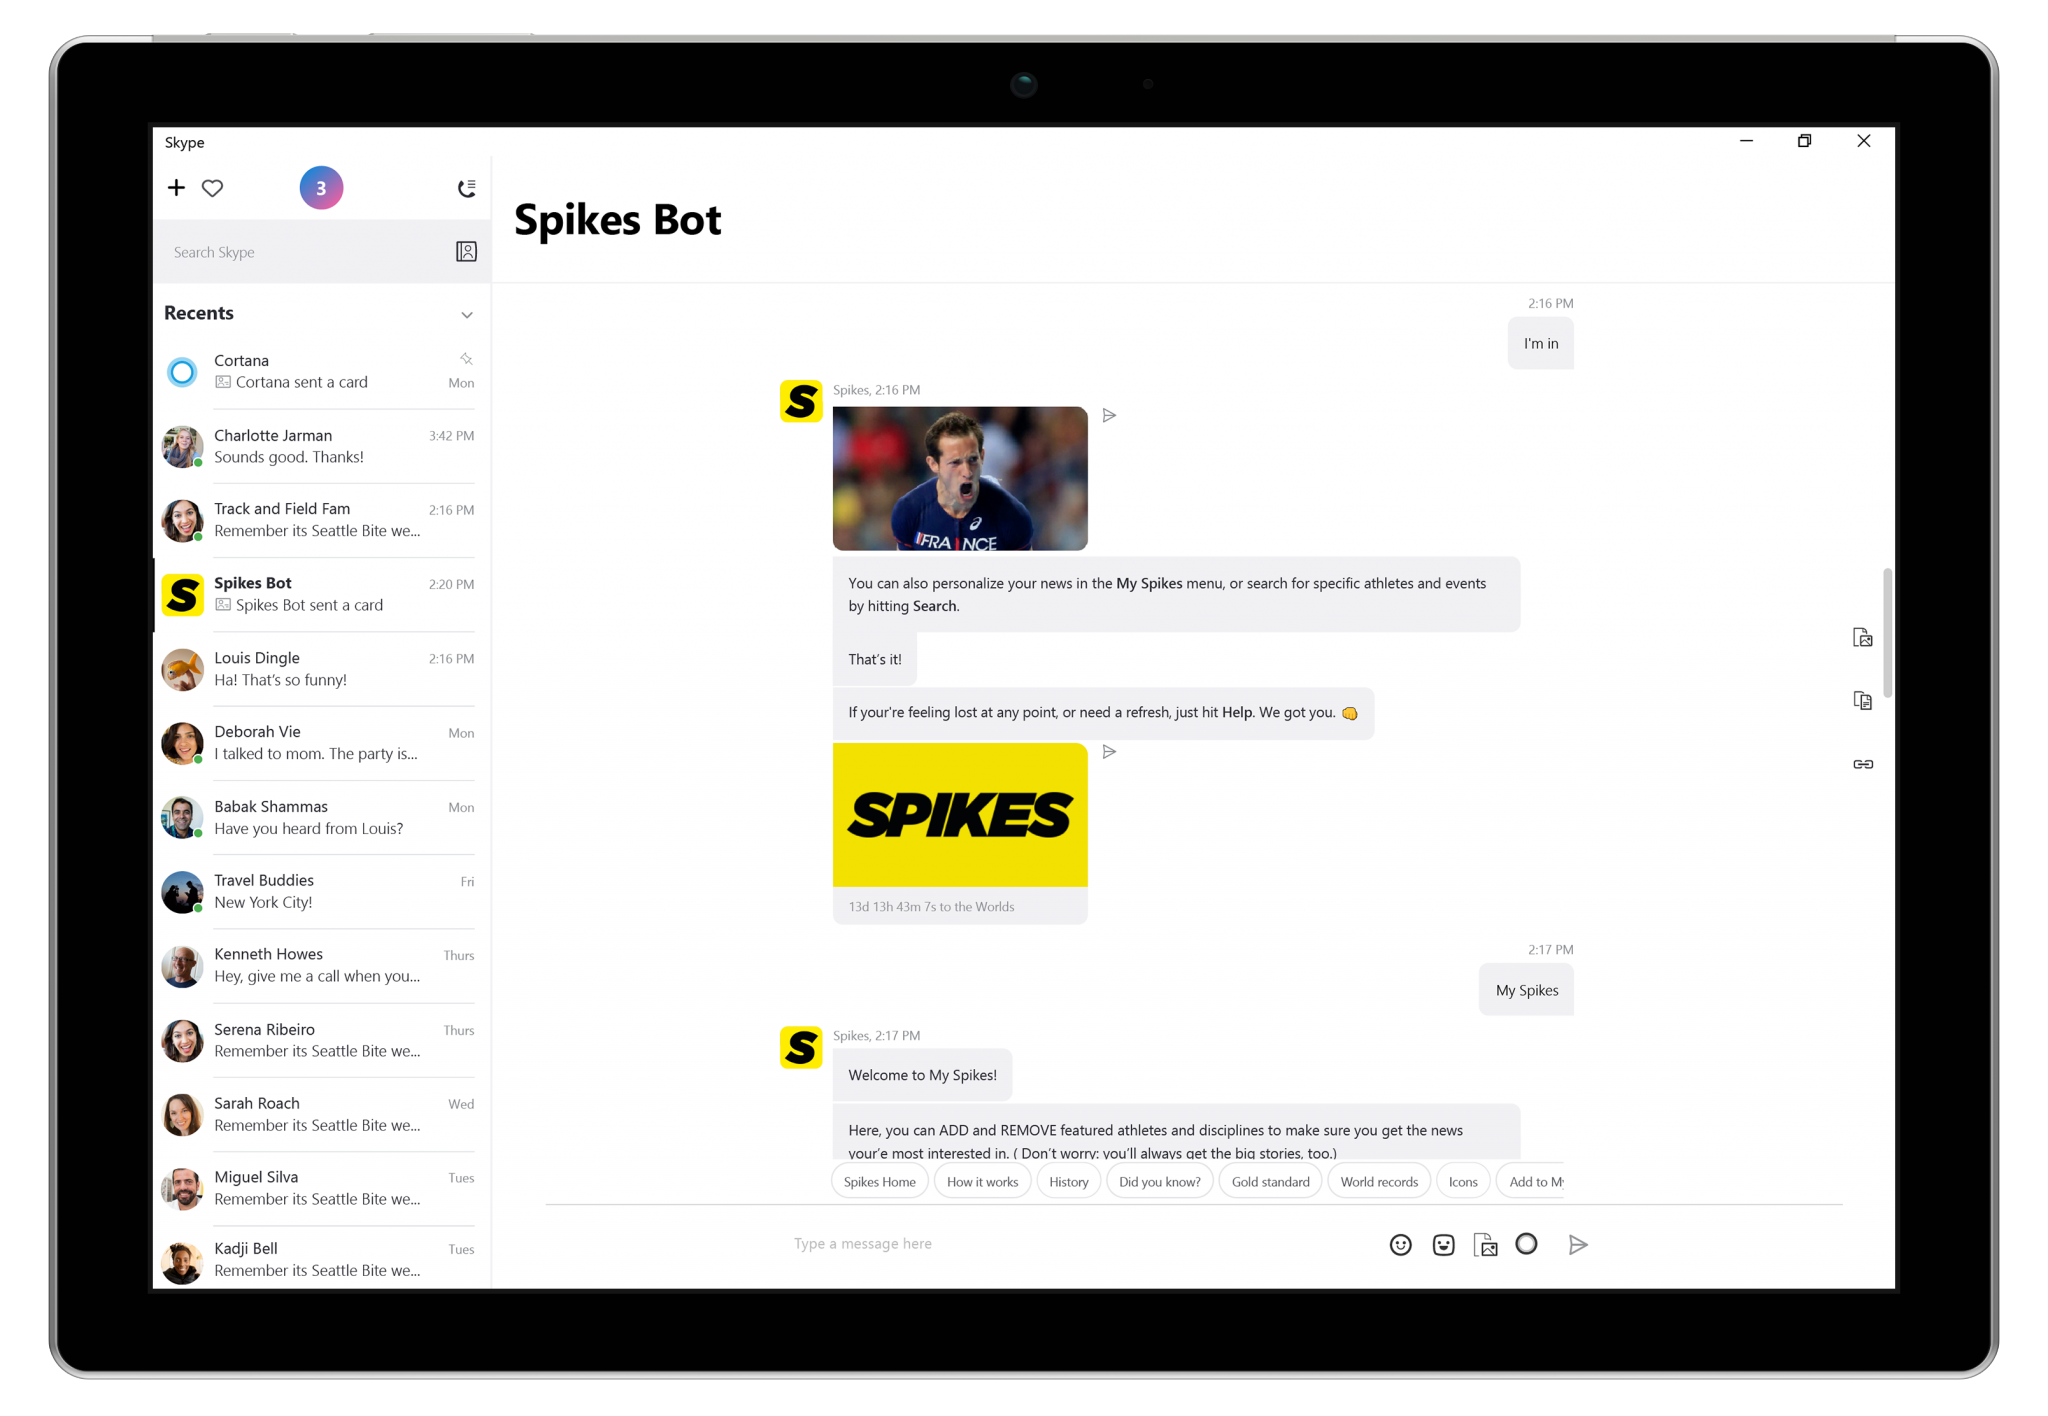 The Spikes Bot has been launched via Skype through the partnership with the IAAF ©IAAF/Spikes Bot